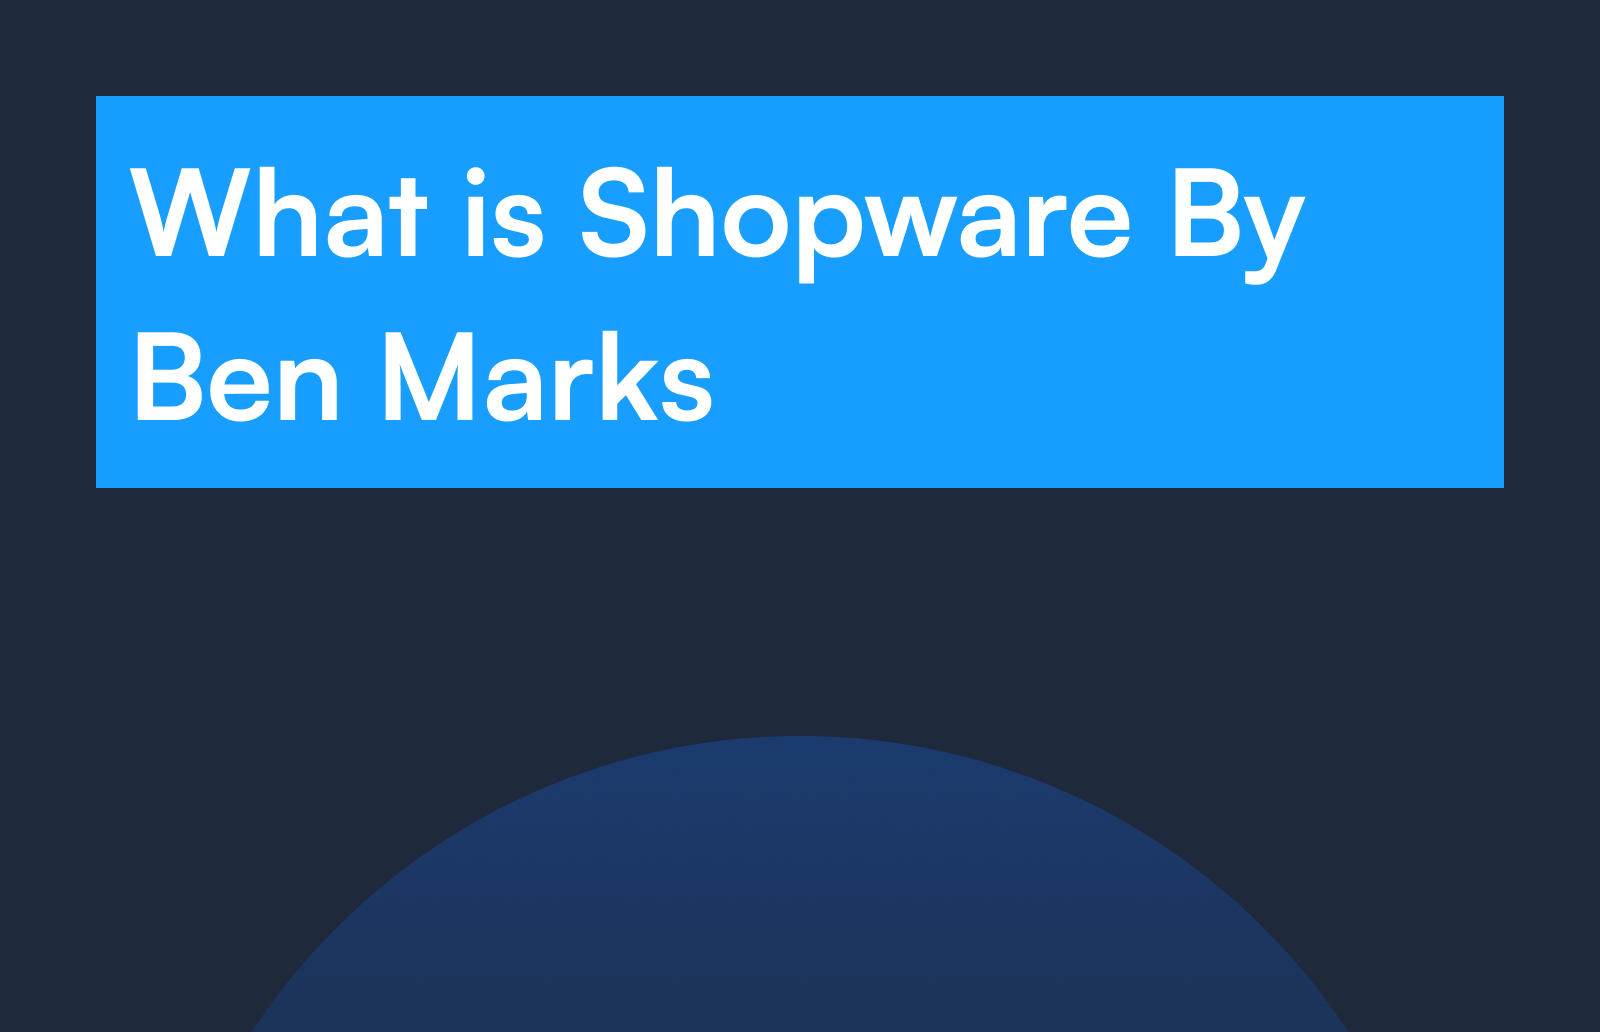 What is Shopware By Ben Marks